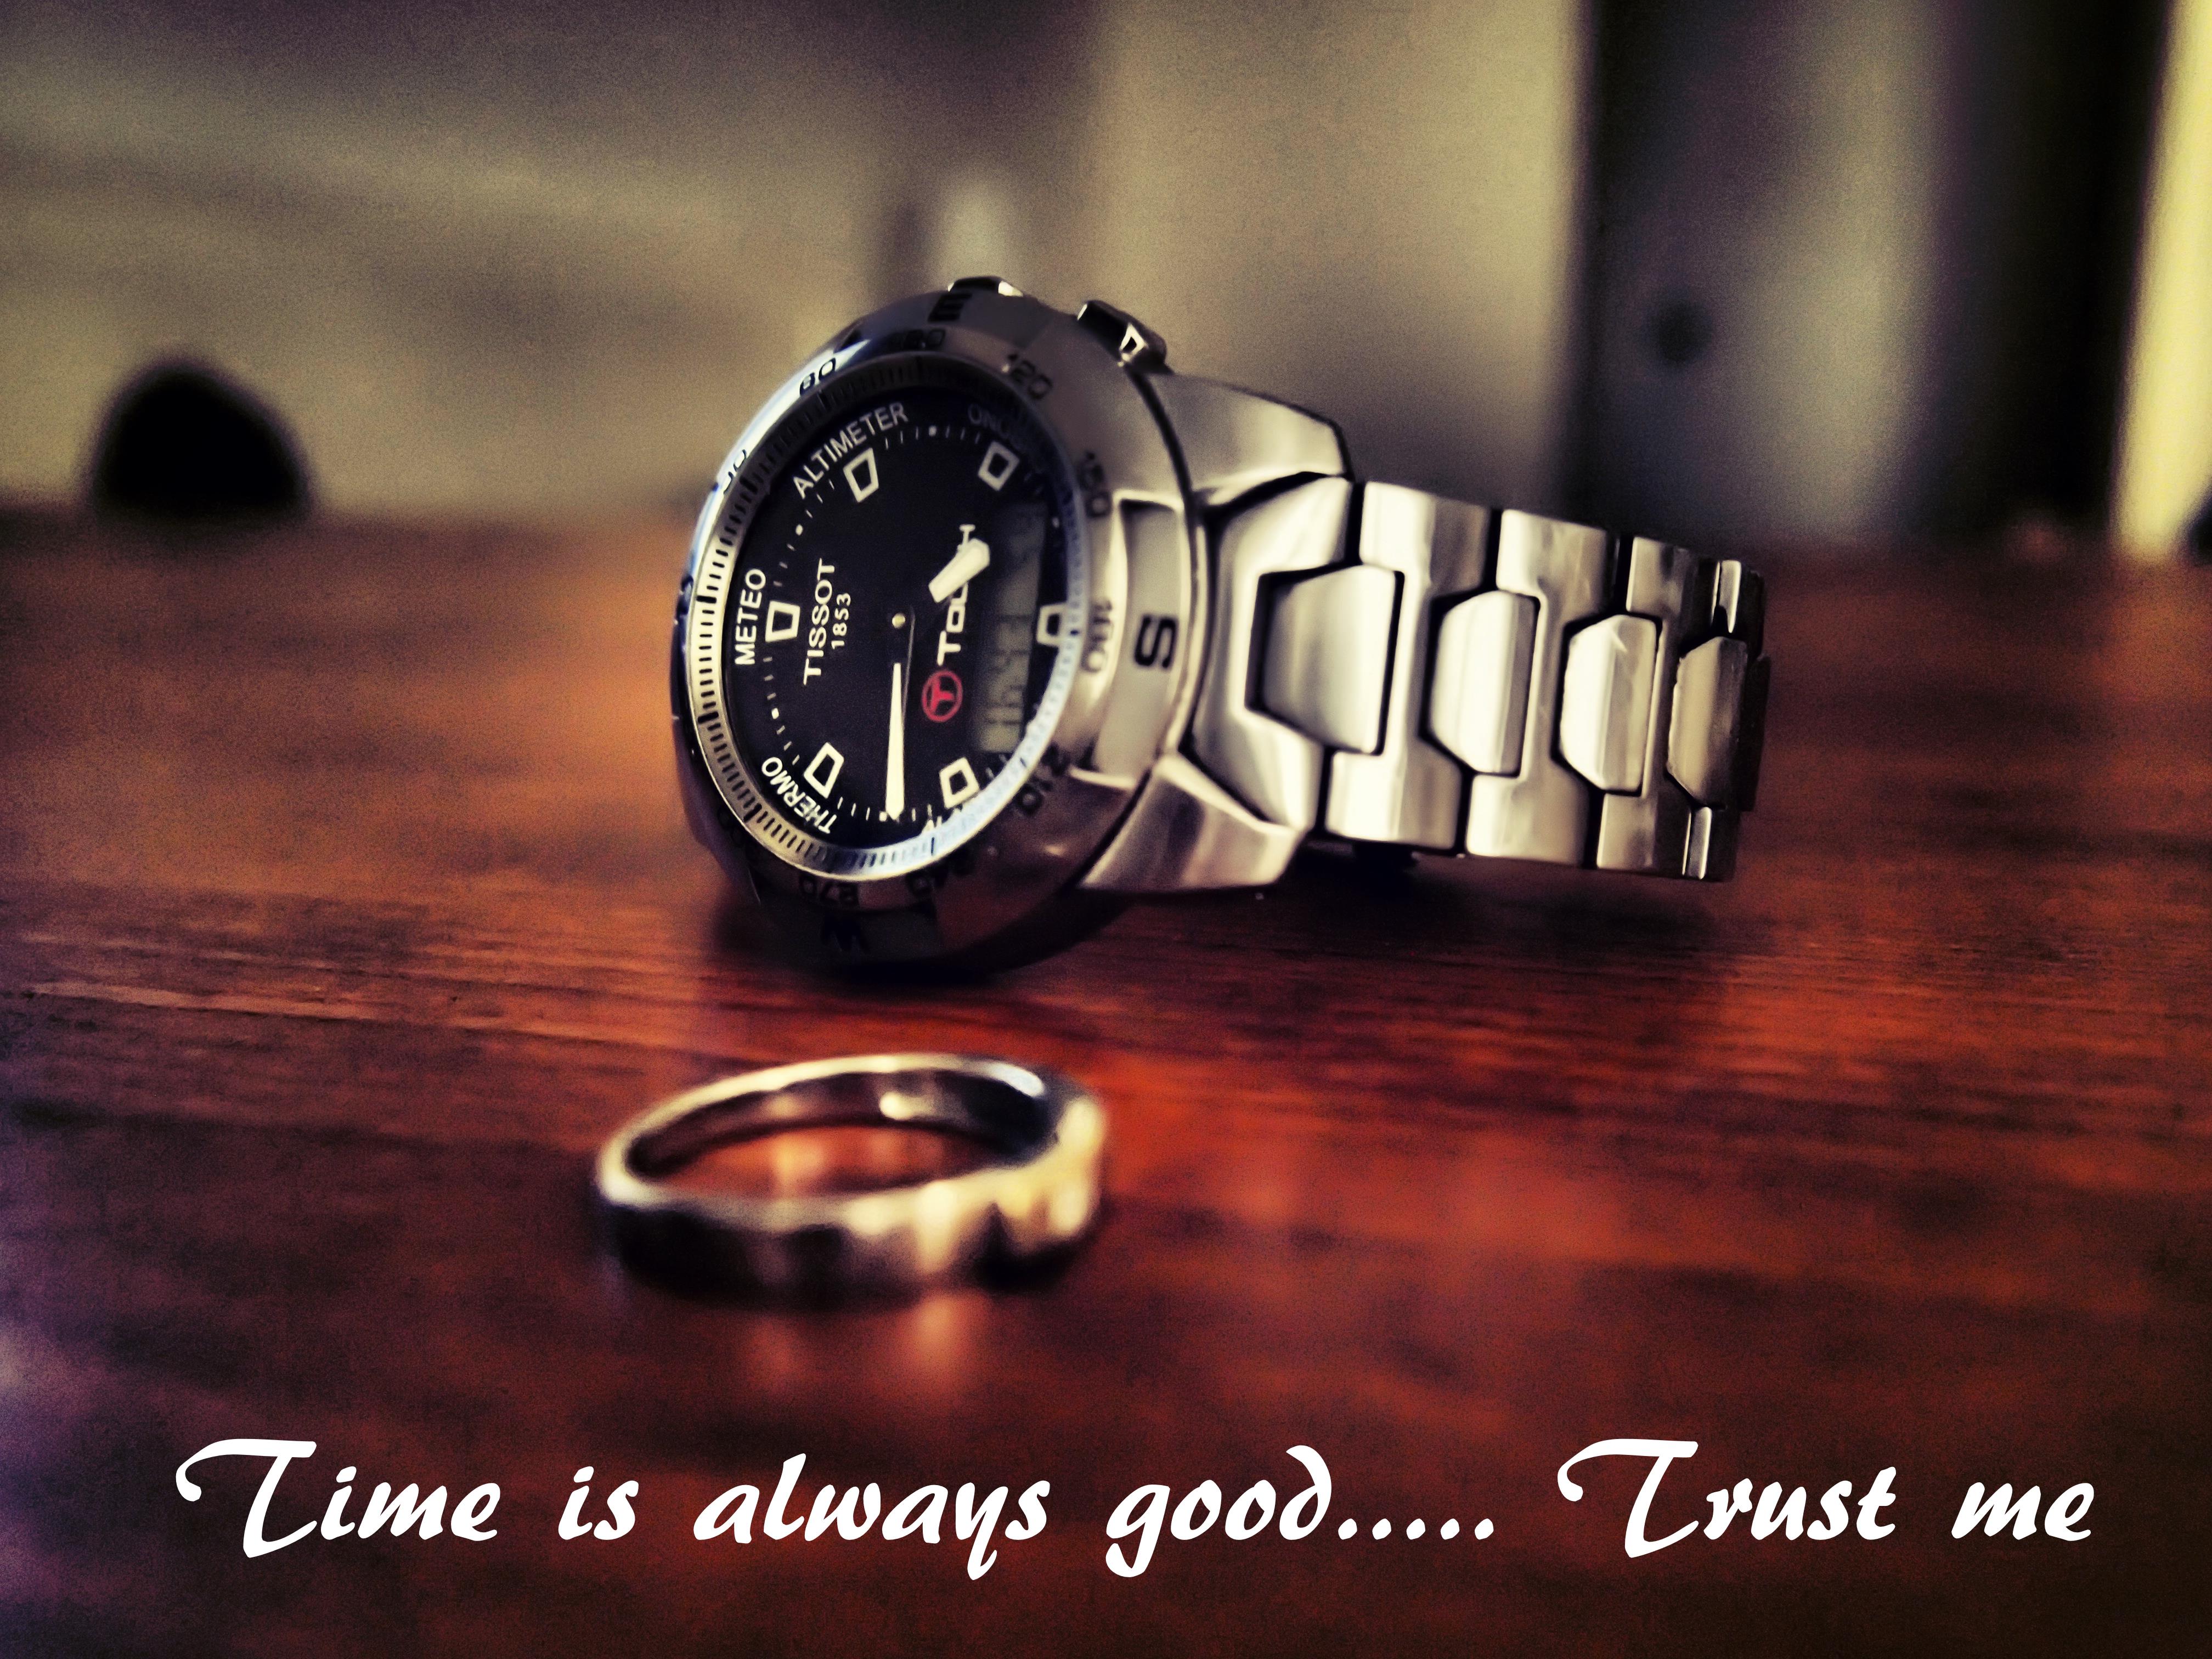 wallpapers for me,watch,watch accessory,fashion accessory,font,still life photography